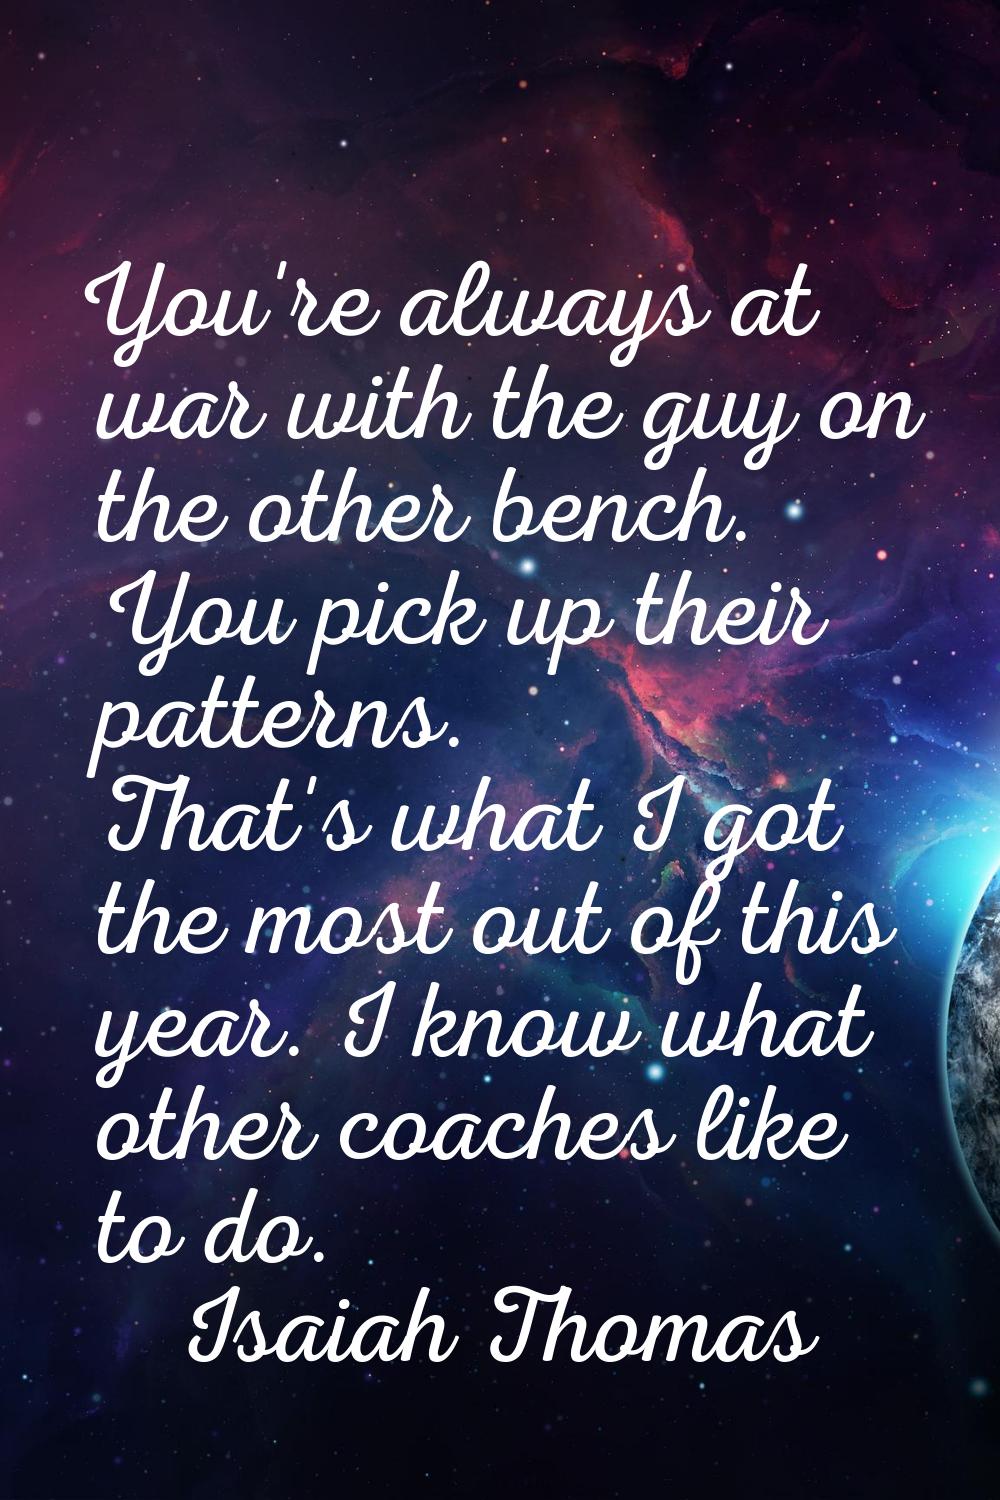 You're always at war with the guy on the other bench. You pick up their patterns. That's what I got